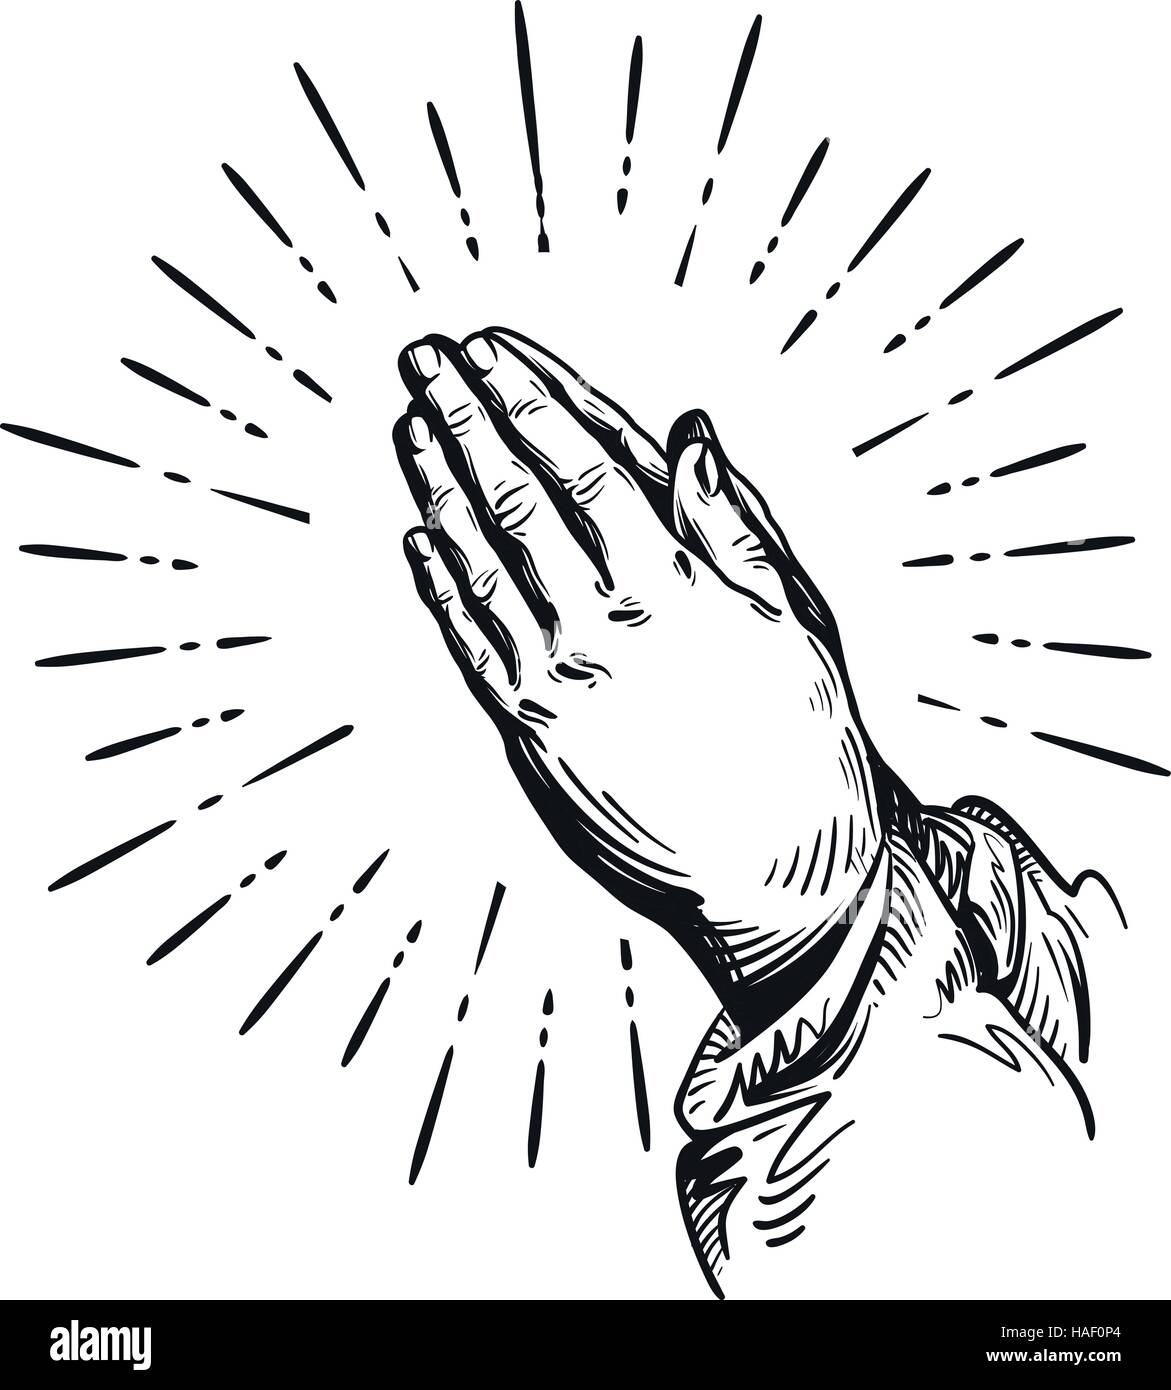 Prayer. Sketch praying hands. Vector illustration isolated on white background Stock Vector